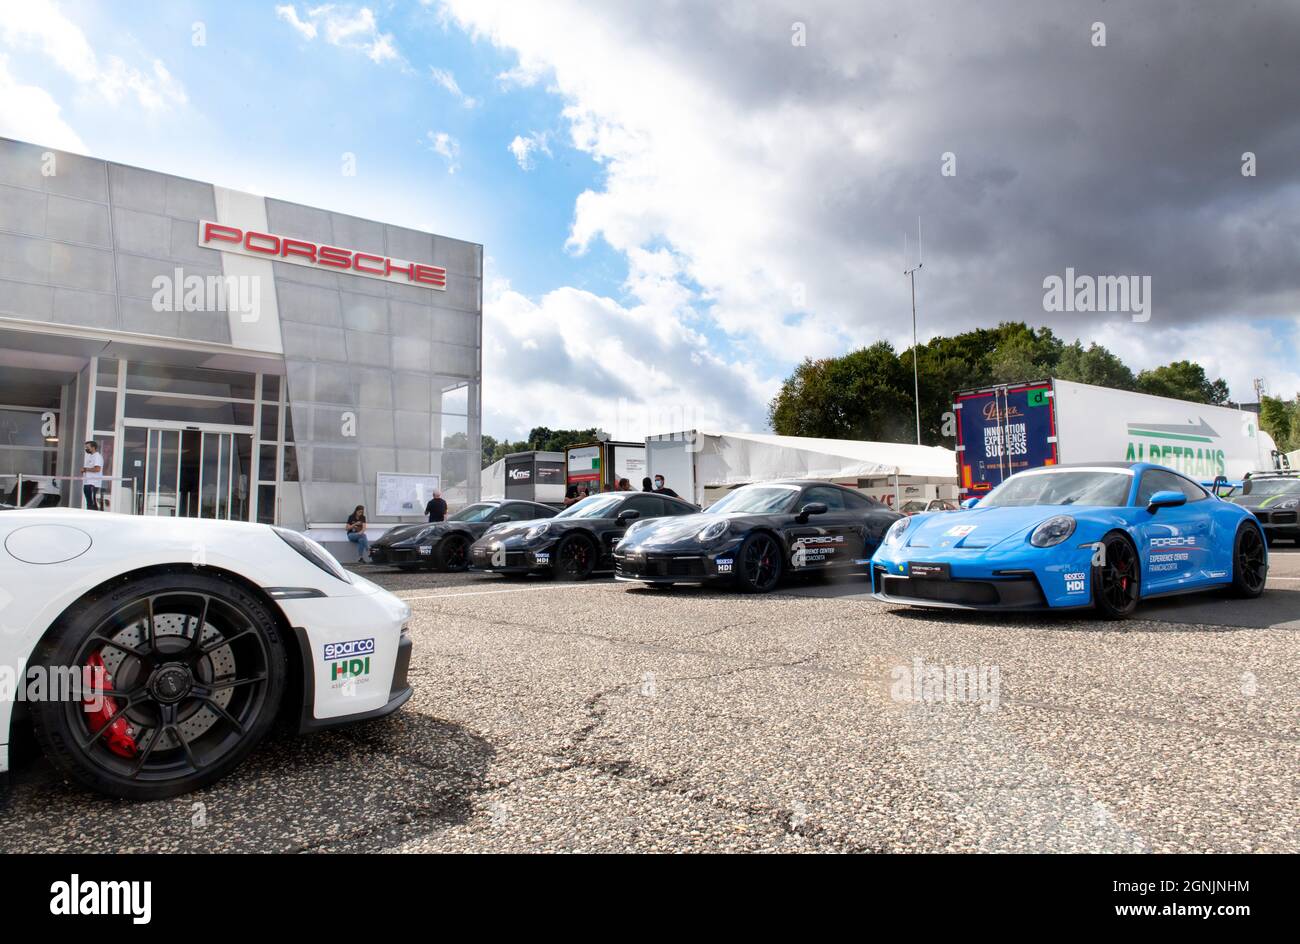 Vallelunga, italy september 19th 2021 Aci racing weekend. Many Prosche cars standing in front of showroom building Stock Photo